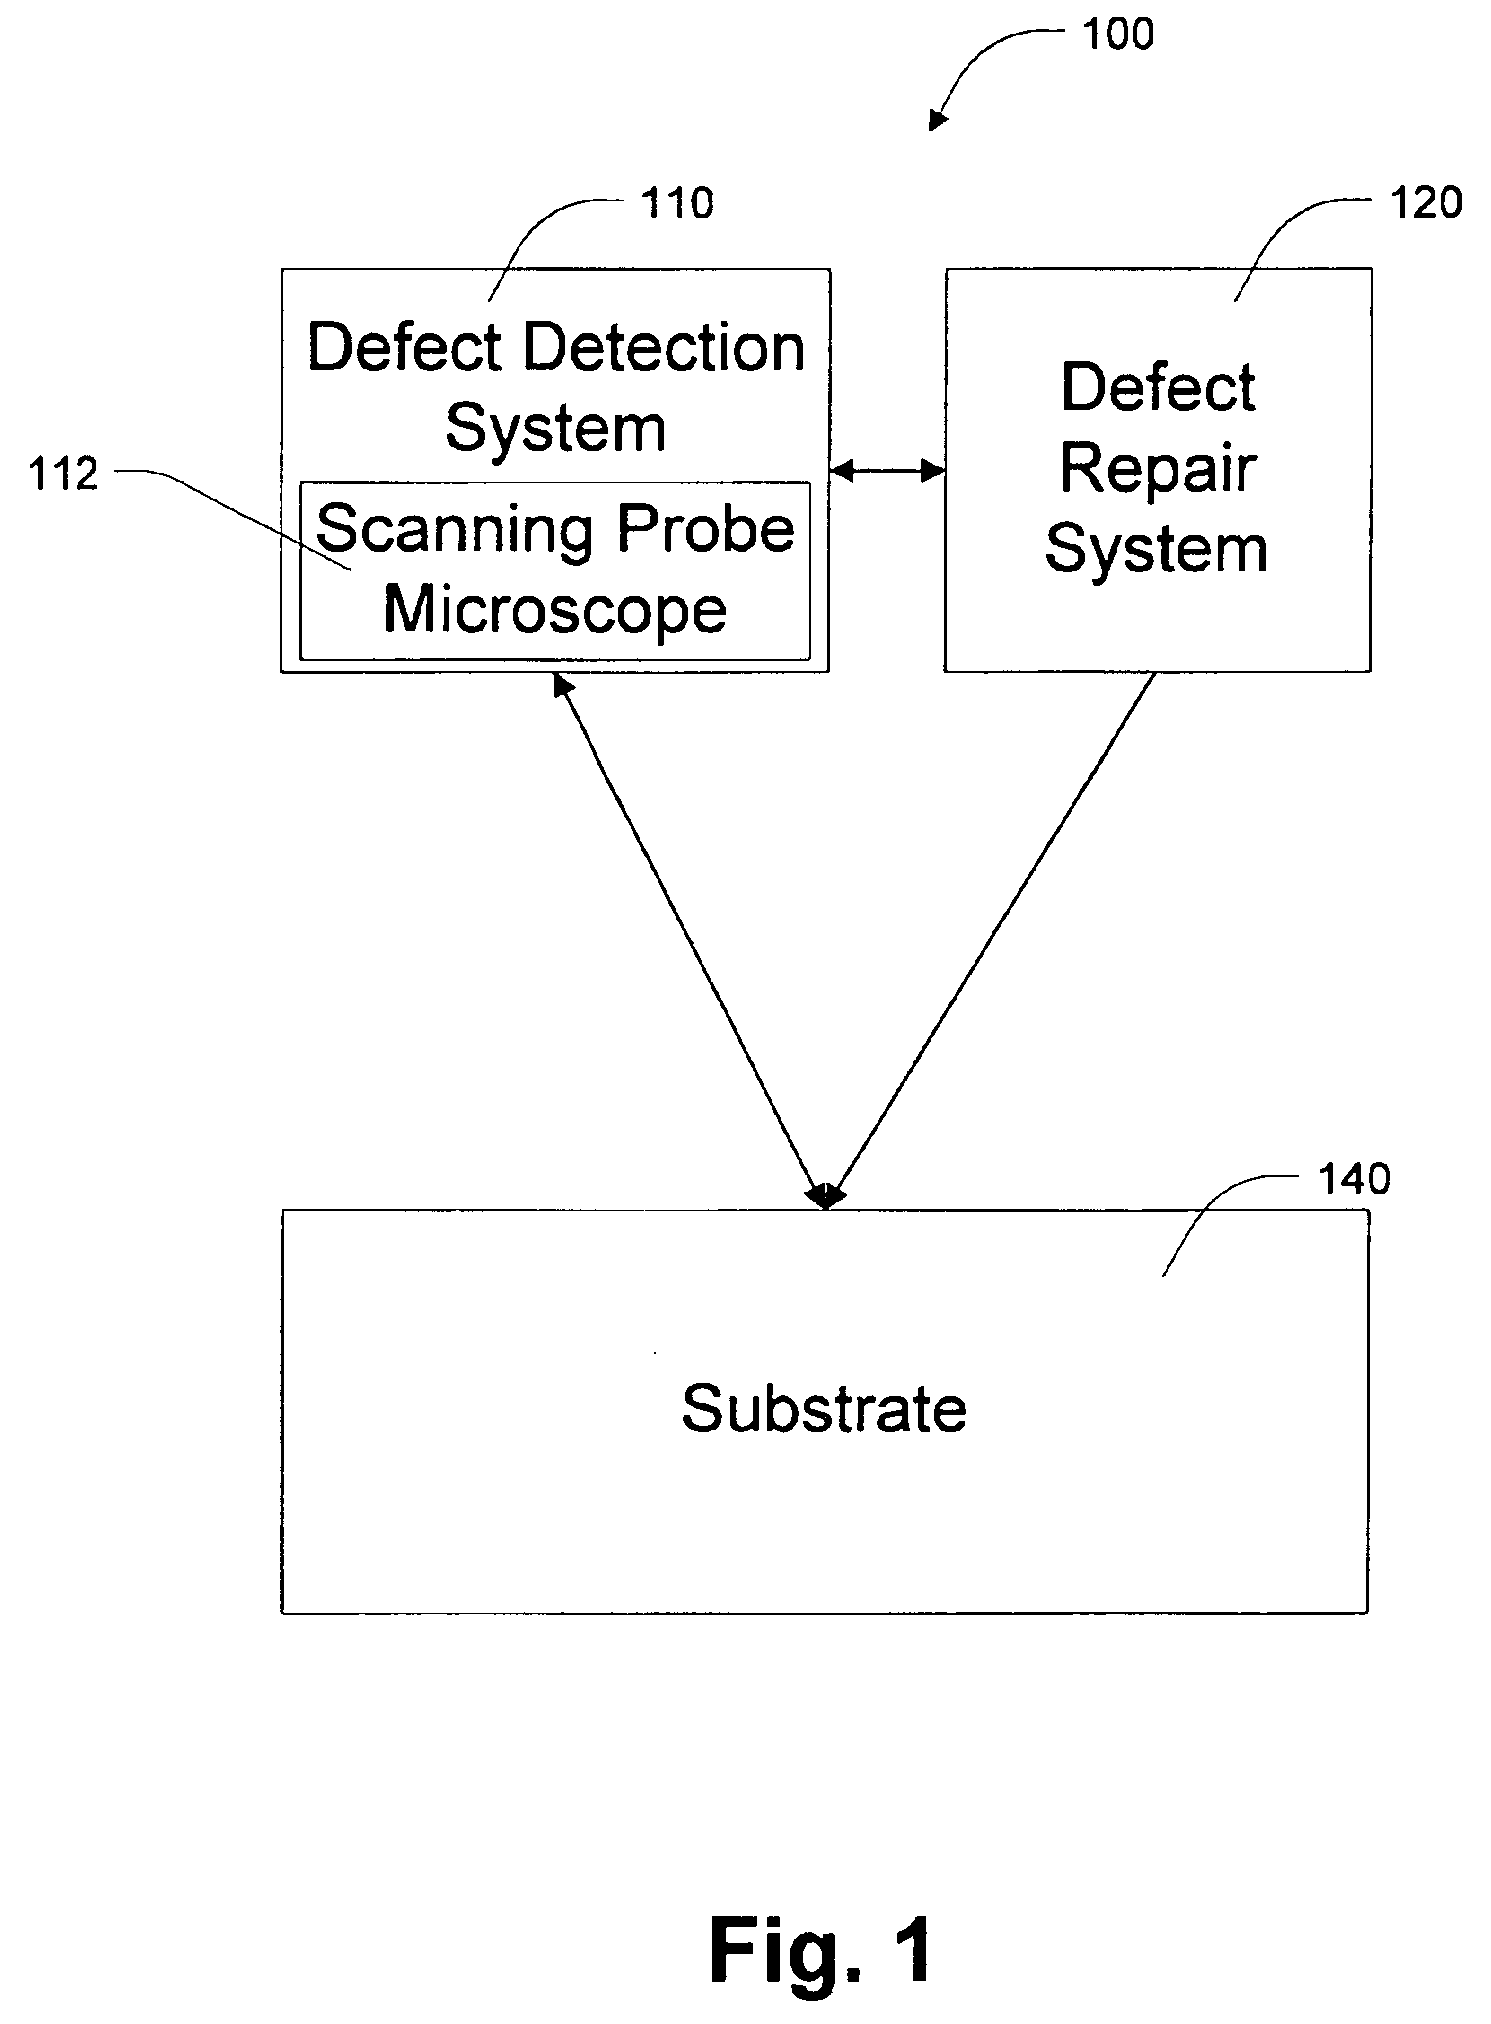 Use of scanning probe microscope for defect detection and repair